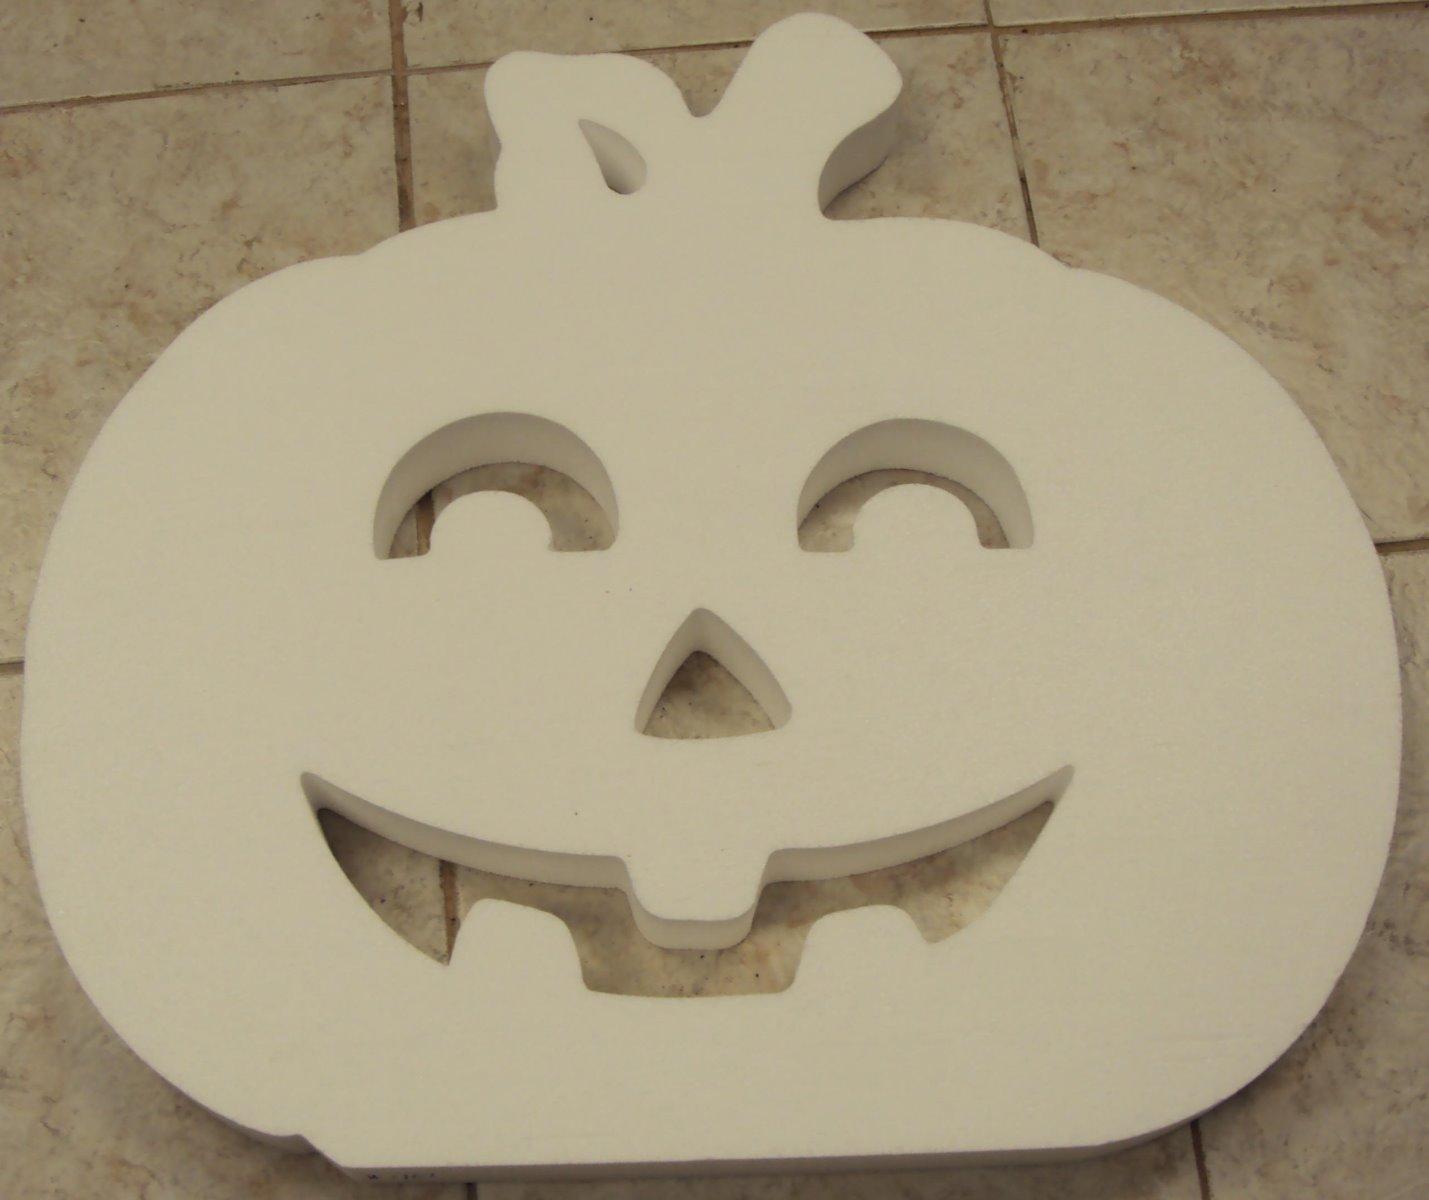 Polystyrene Foam Cutting Services for Arts, Crafts & More